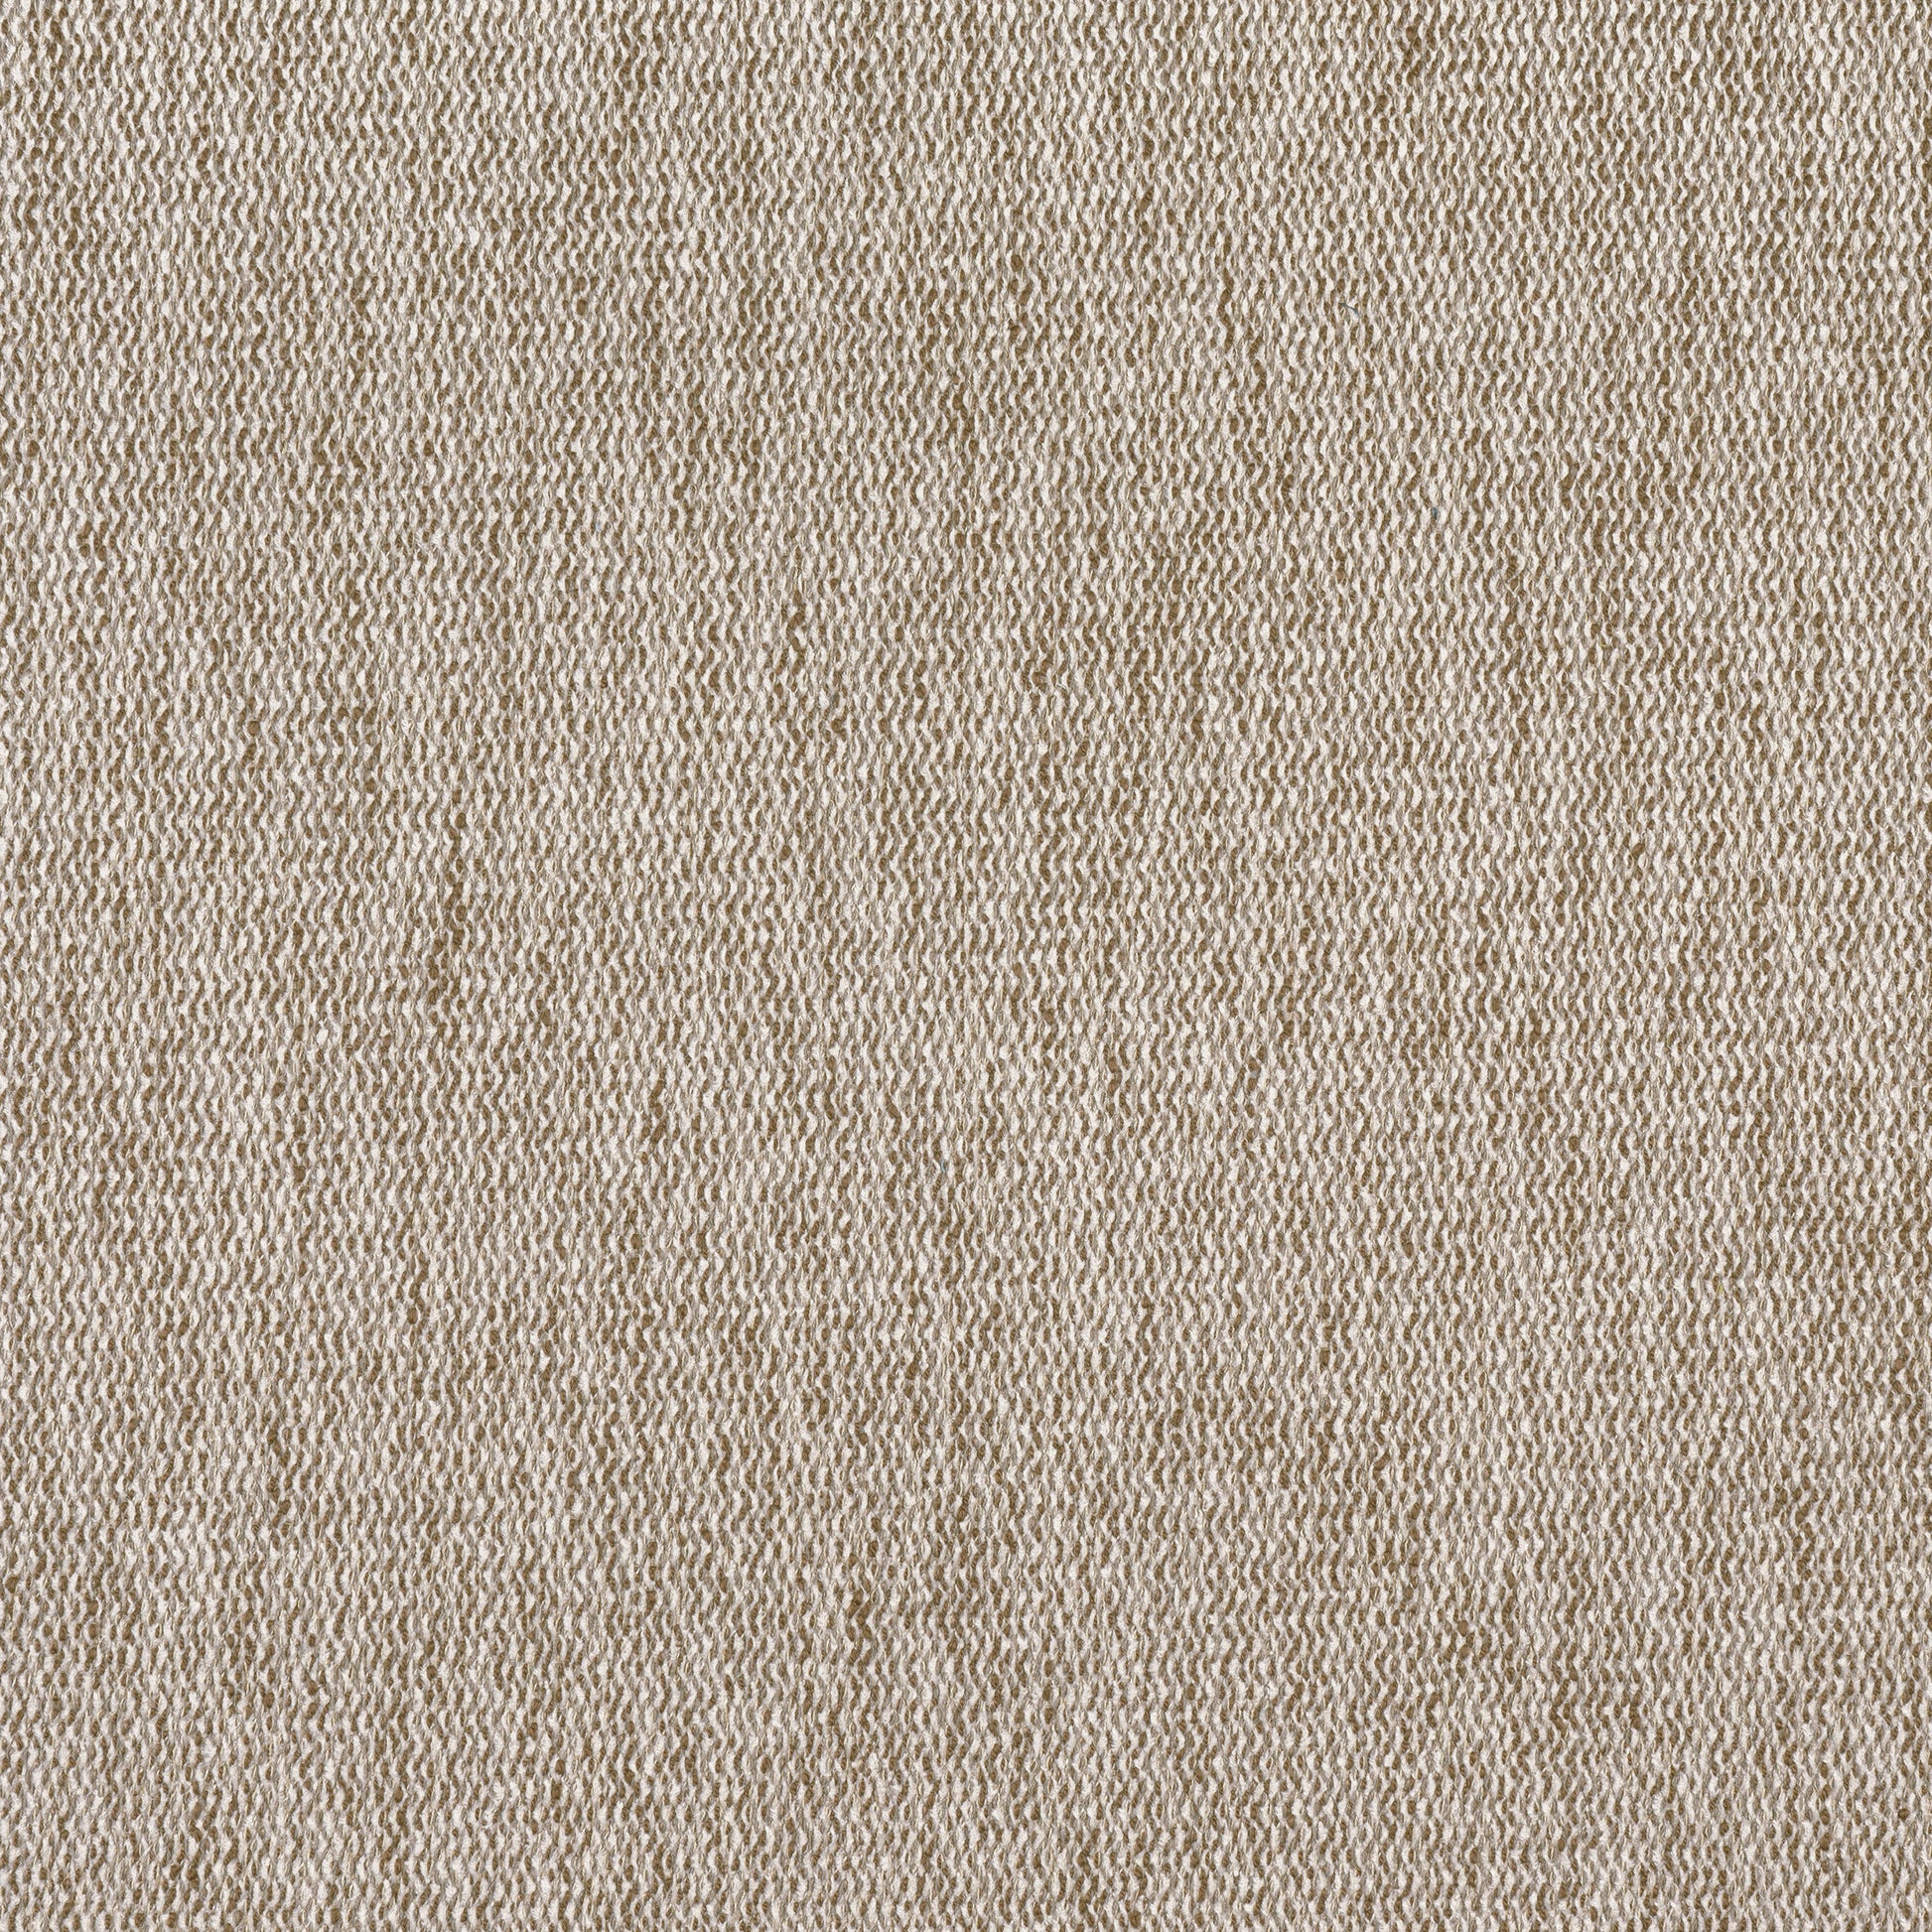 Purchase Thibaut Fabric SKU# W8782 pattern name Arroyo color Latte